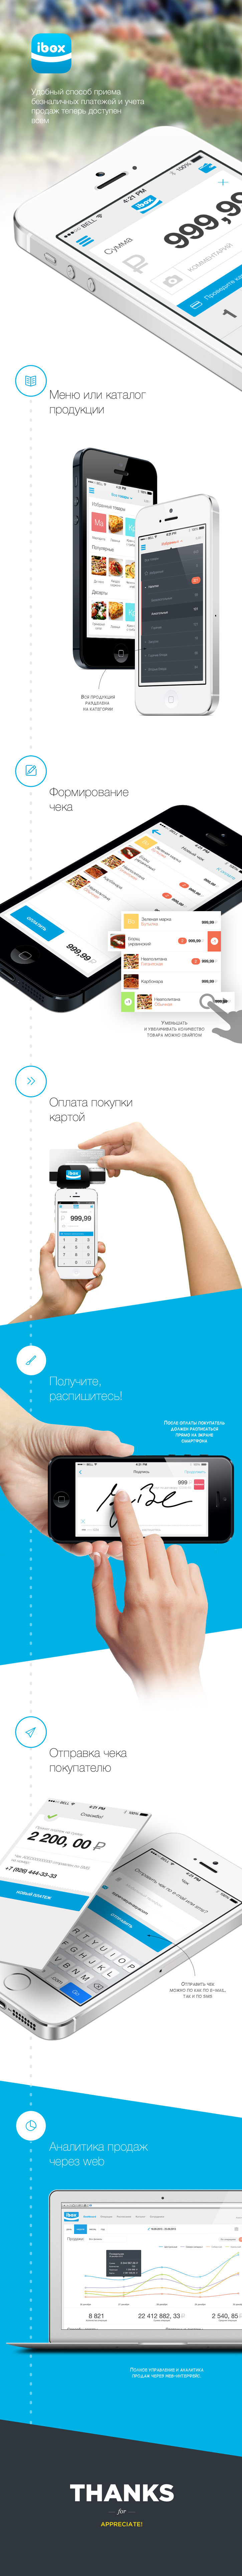 mpos finance payments app